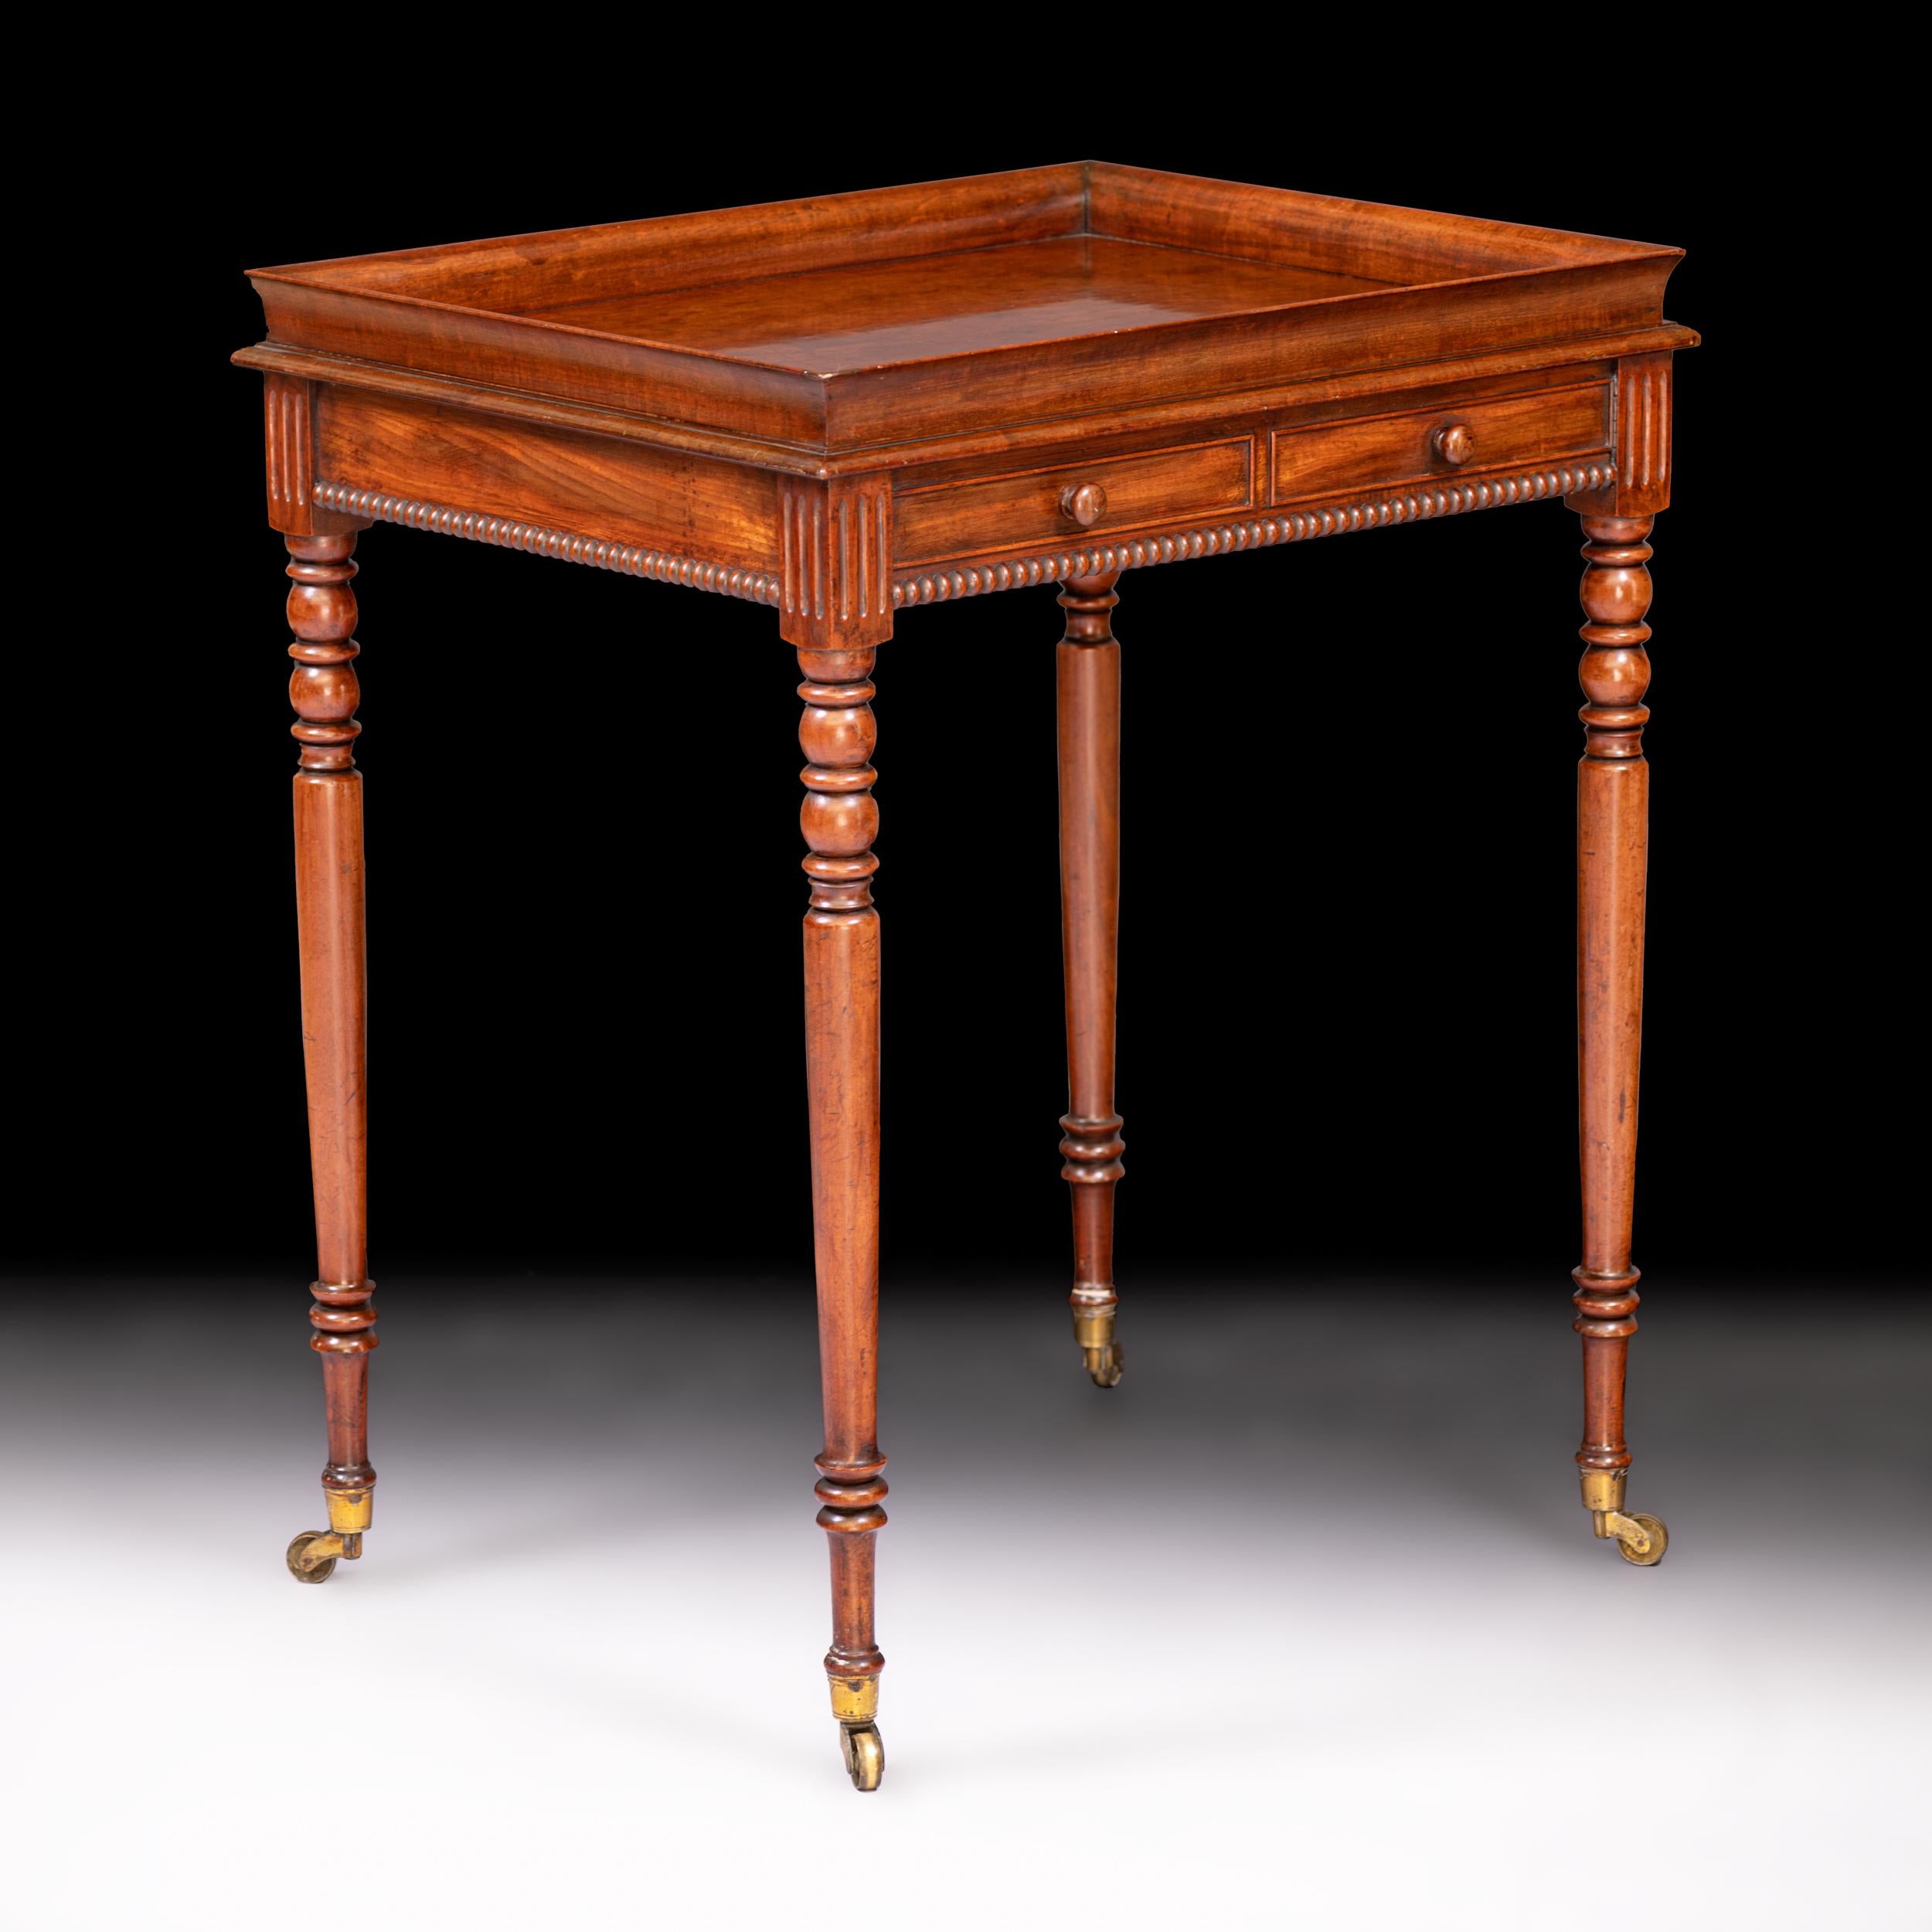 A fine Regency mahogany occasional table attributed to Gillows of Lancaster, with tray top above frieze drawers and beaded border, on turned tapering legs with castors.

Circa 1828

English.